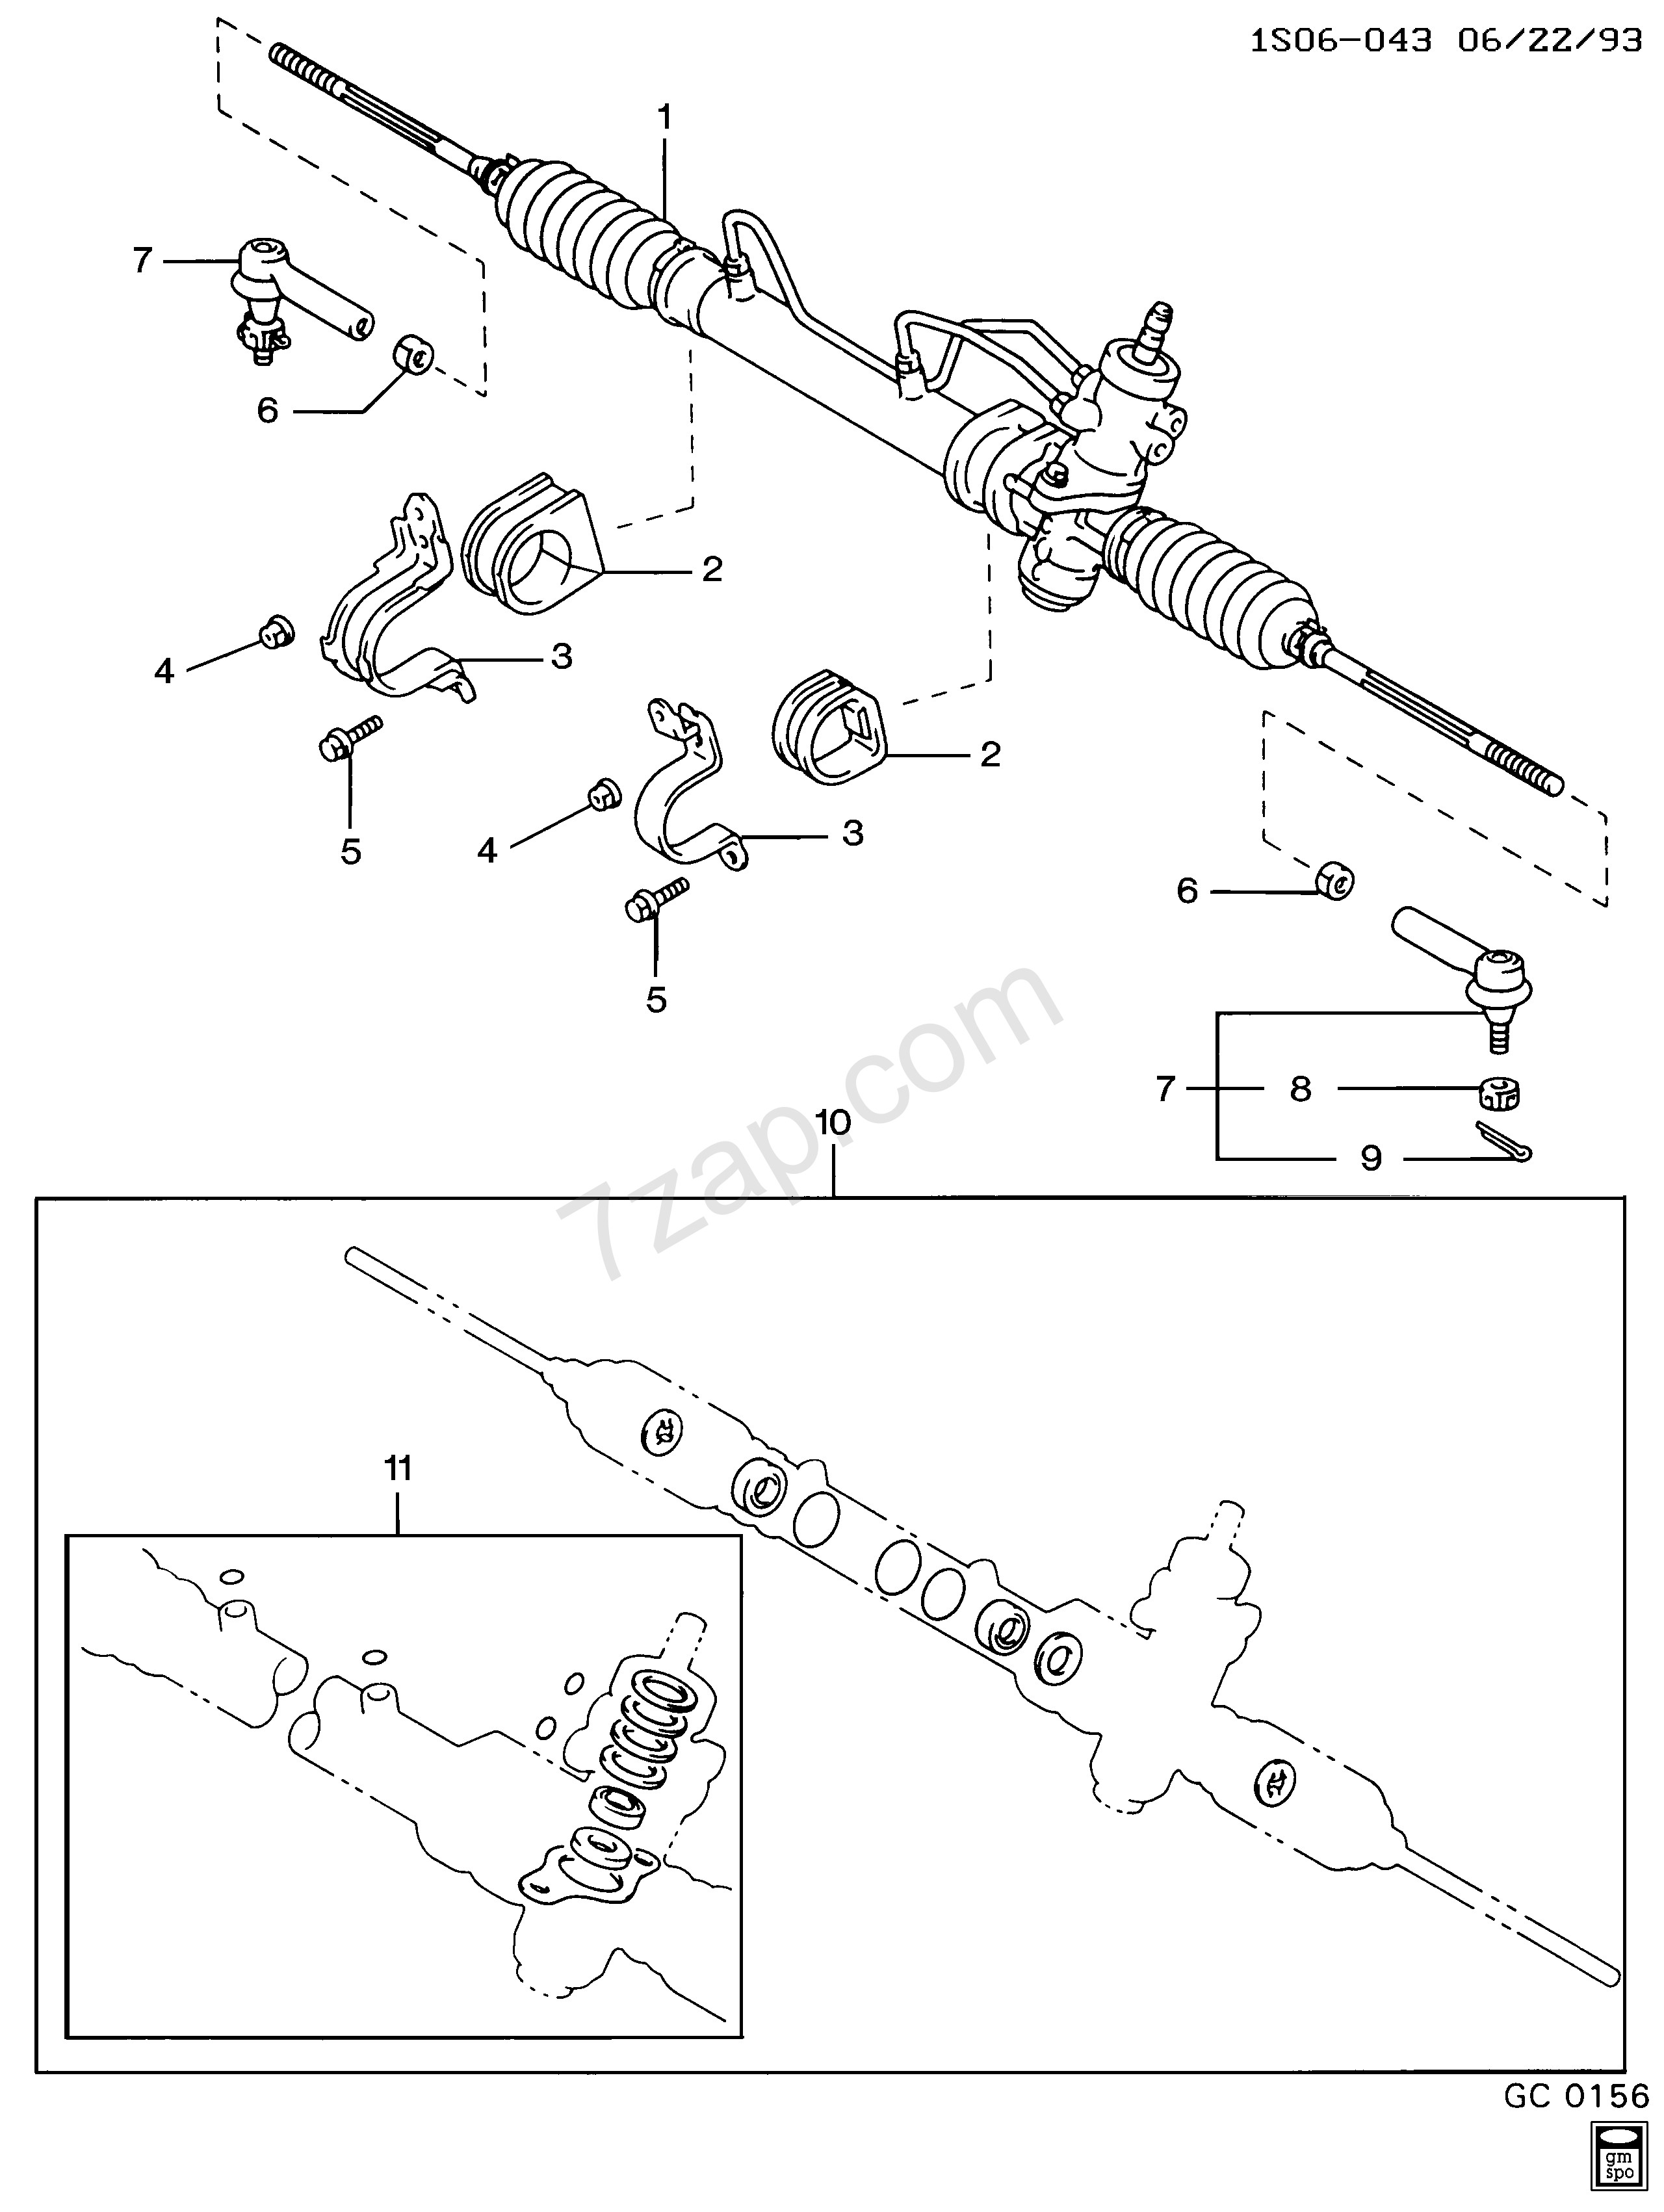 Power Steering Rack and Pinion Diagram 1993 1997 S Steering asm Rack & Pinion Part 1 Power N41 Chevrolet Of Power Steering Rack and Pinion Diagram